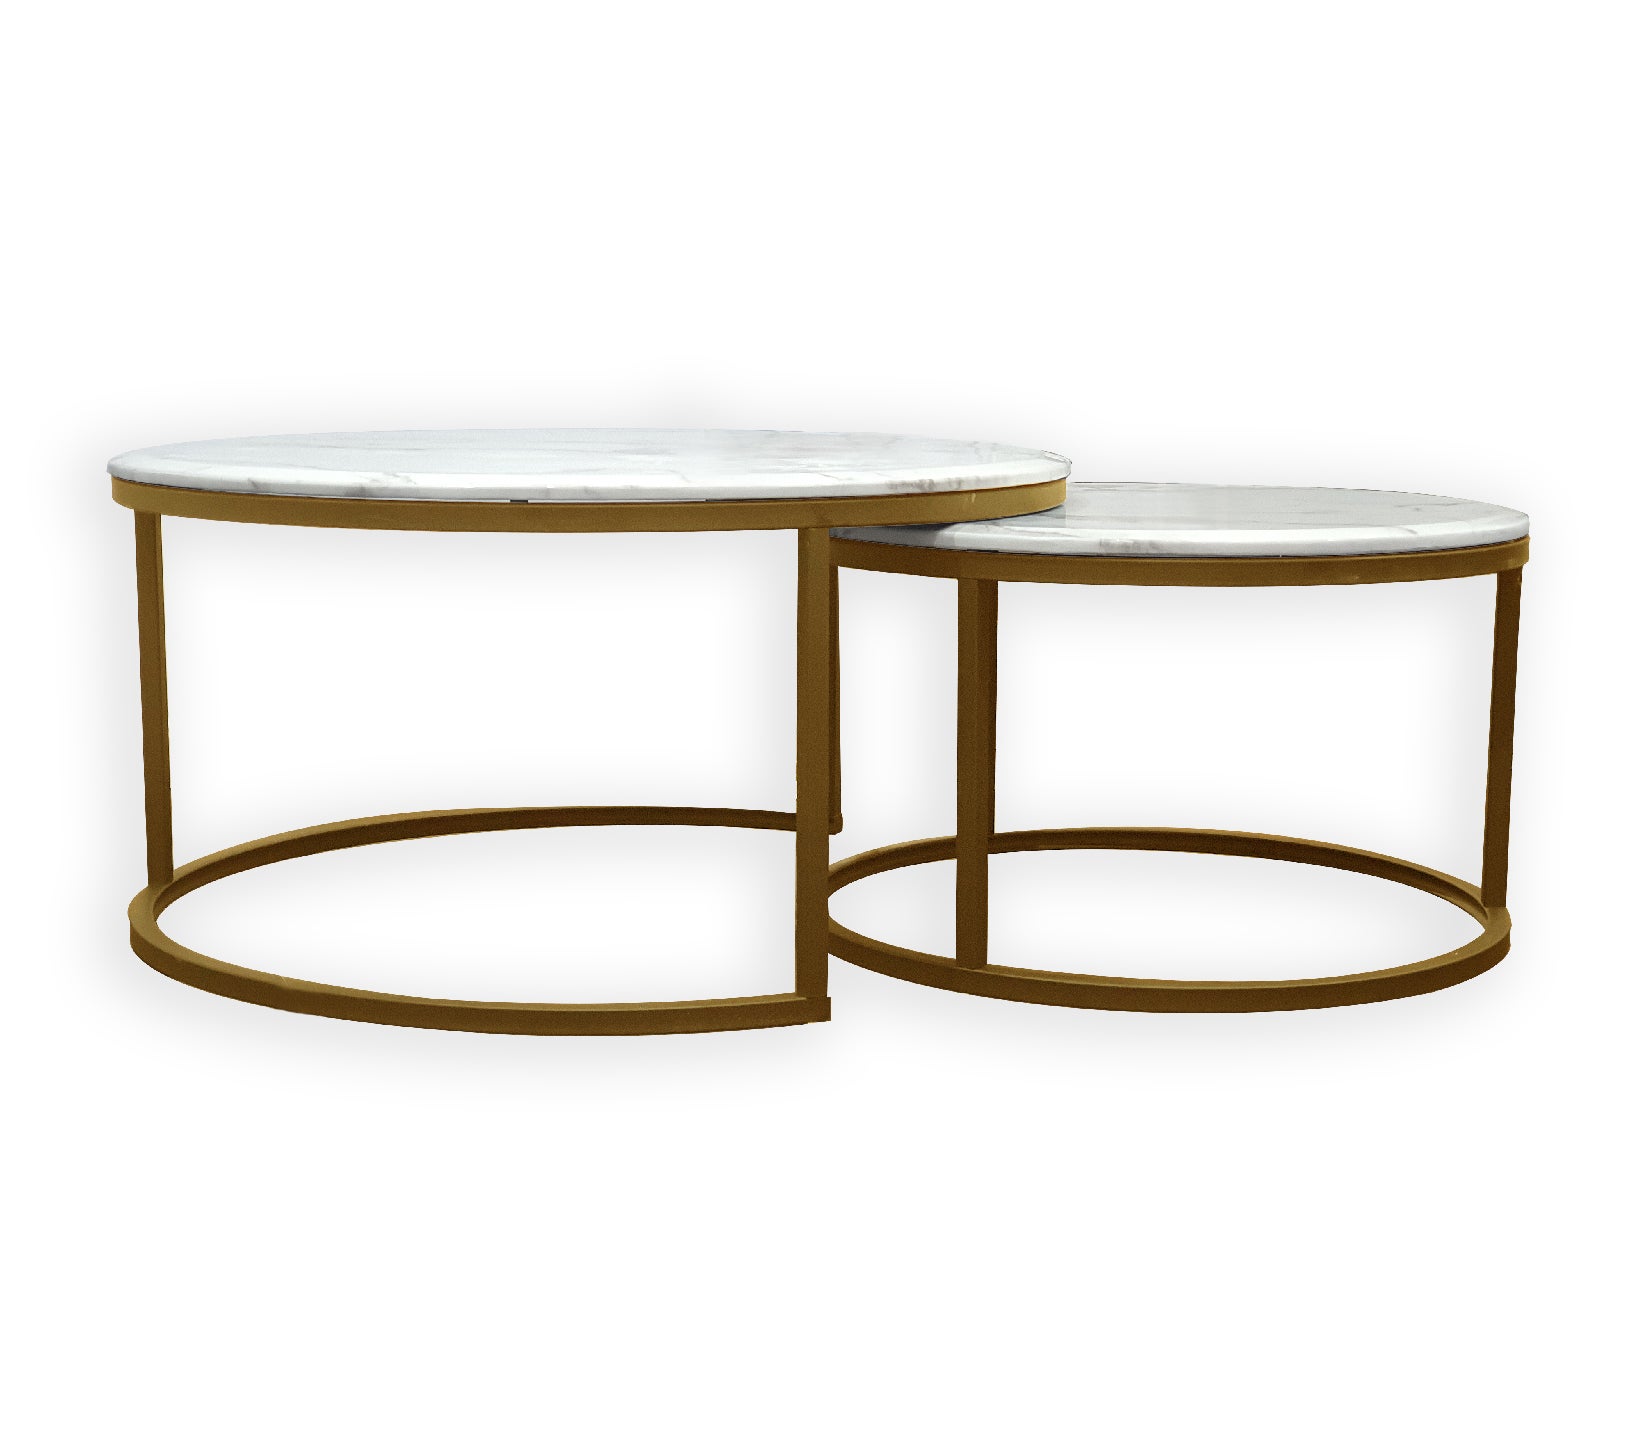 Romana set of 2 Marble Top Nesting Coffee Table - Large 80cm/60cm - Champagne